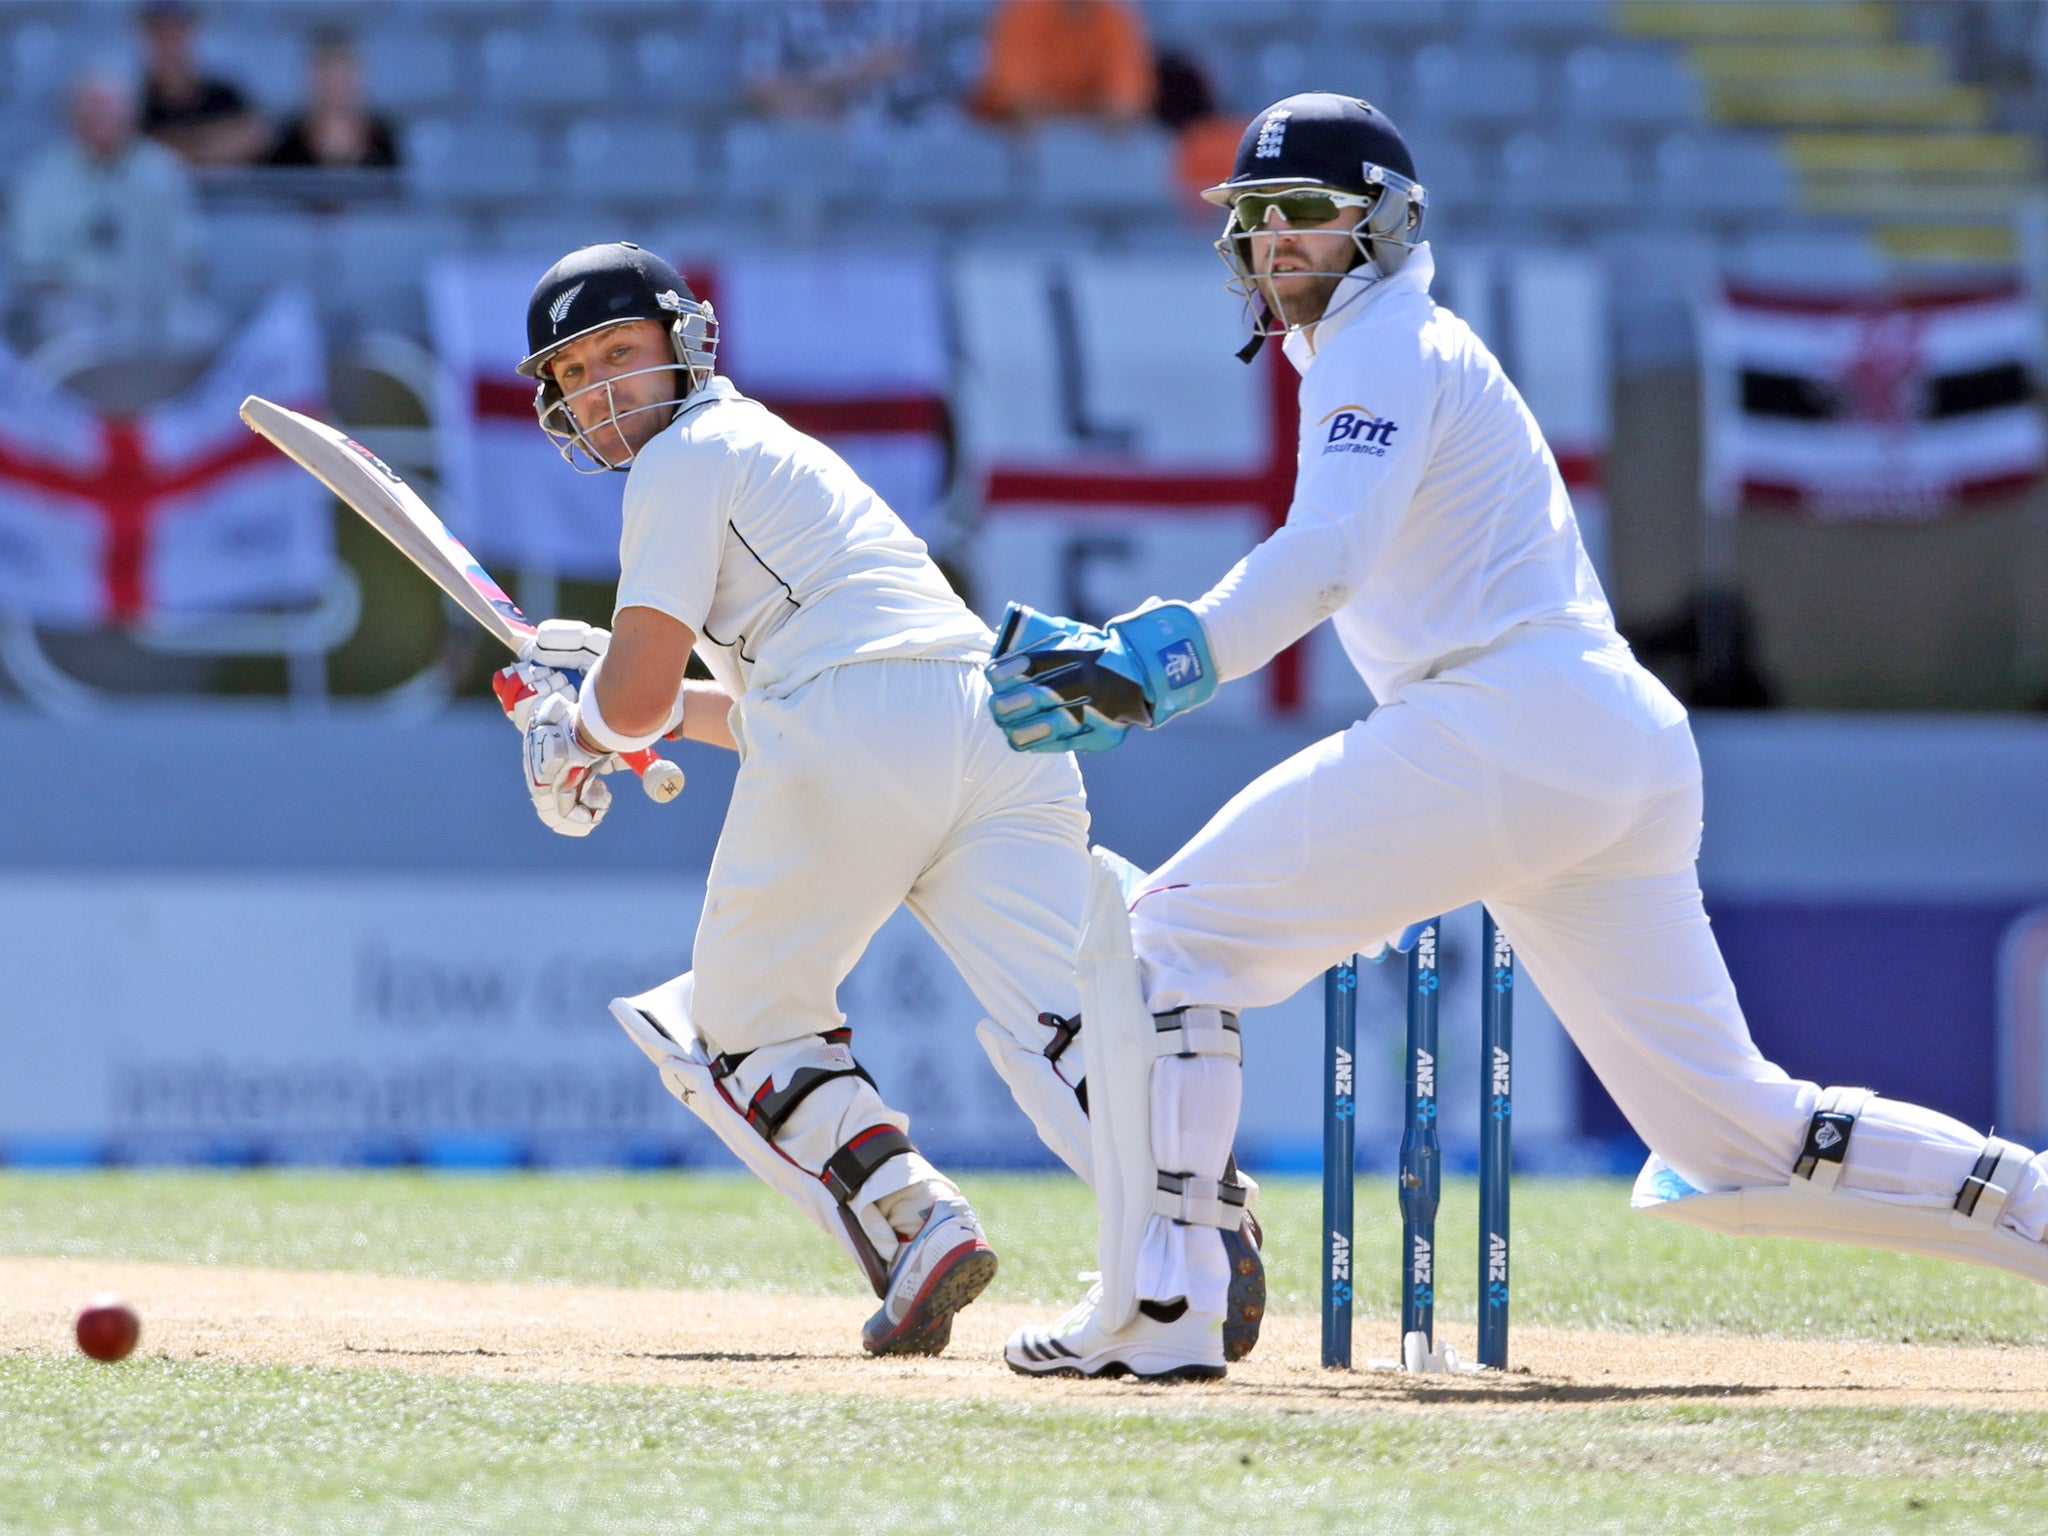 New Zealand’s captain, Brendon McCullum, at the crease during the final Test match against England in March